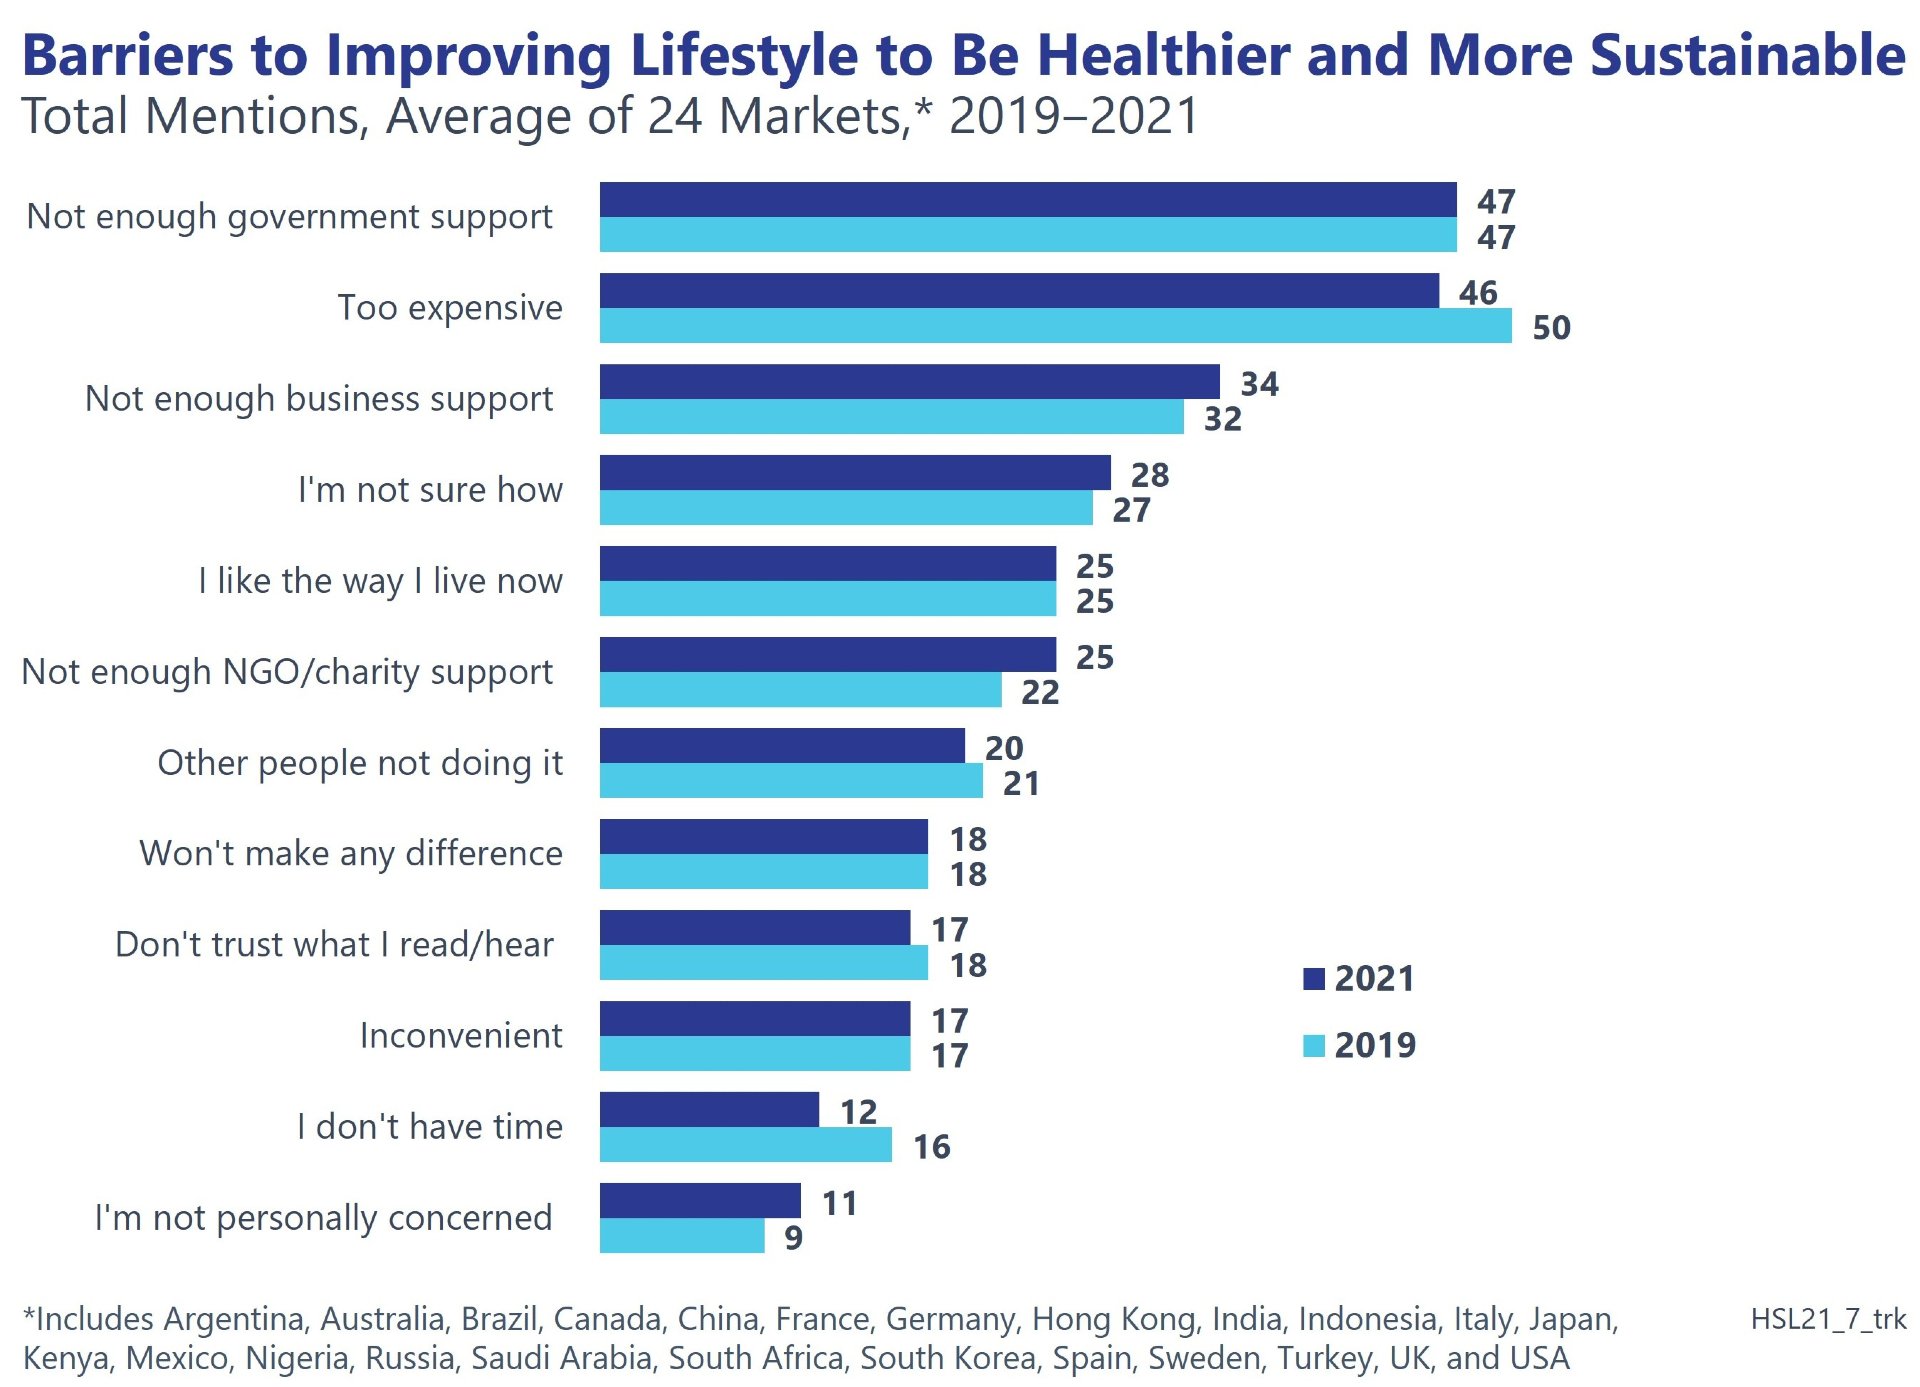 Barriers to improving lifestyle to be healthy and sustainable